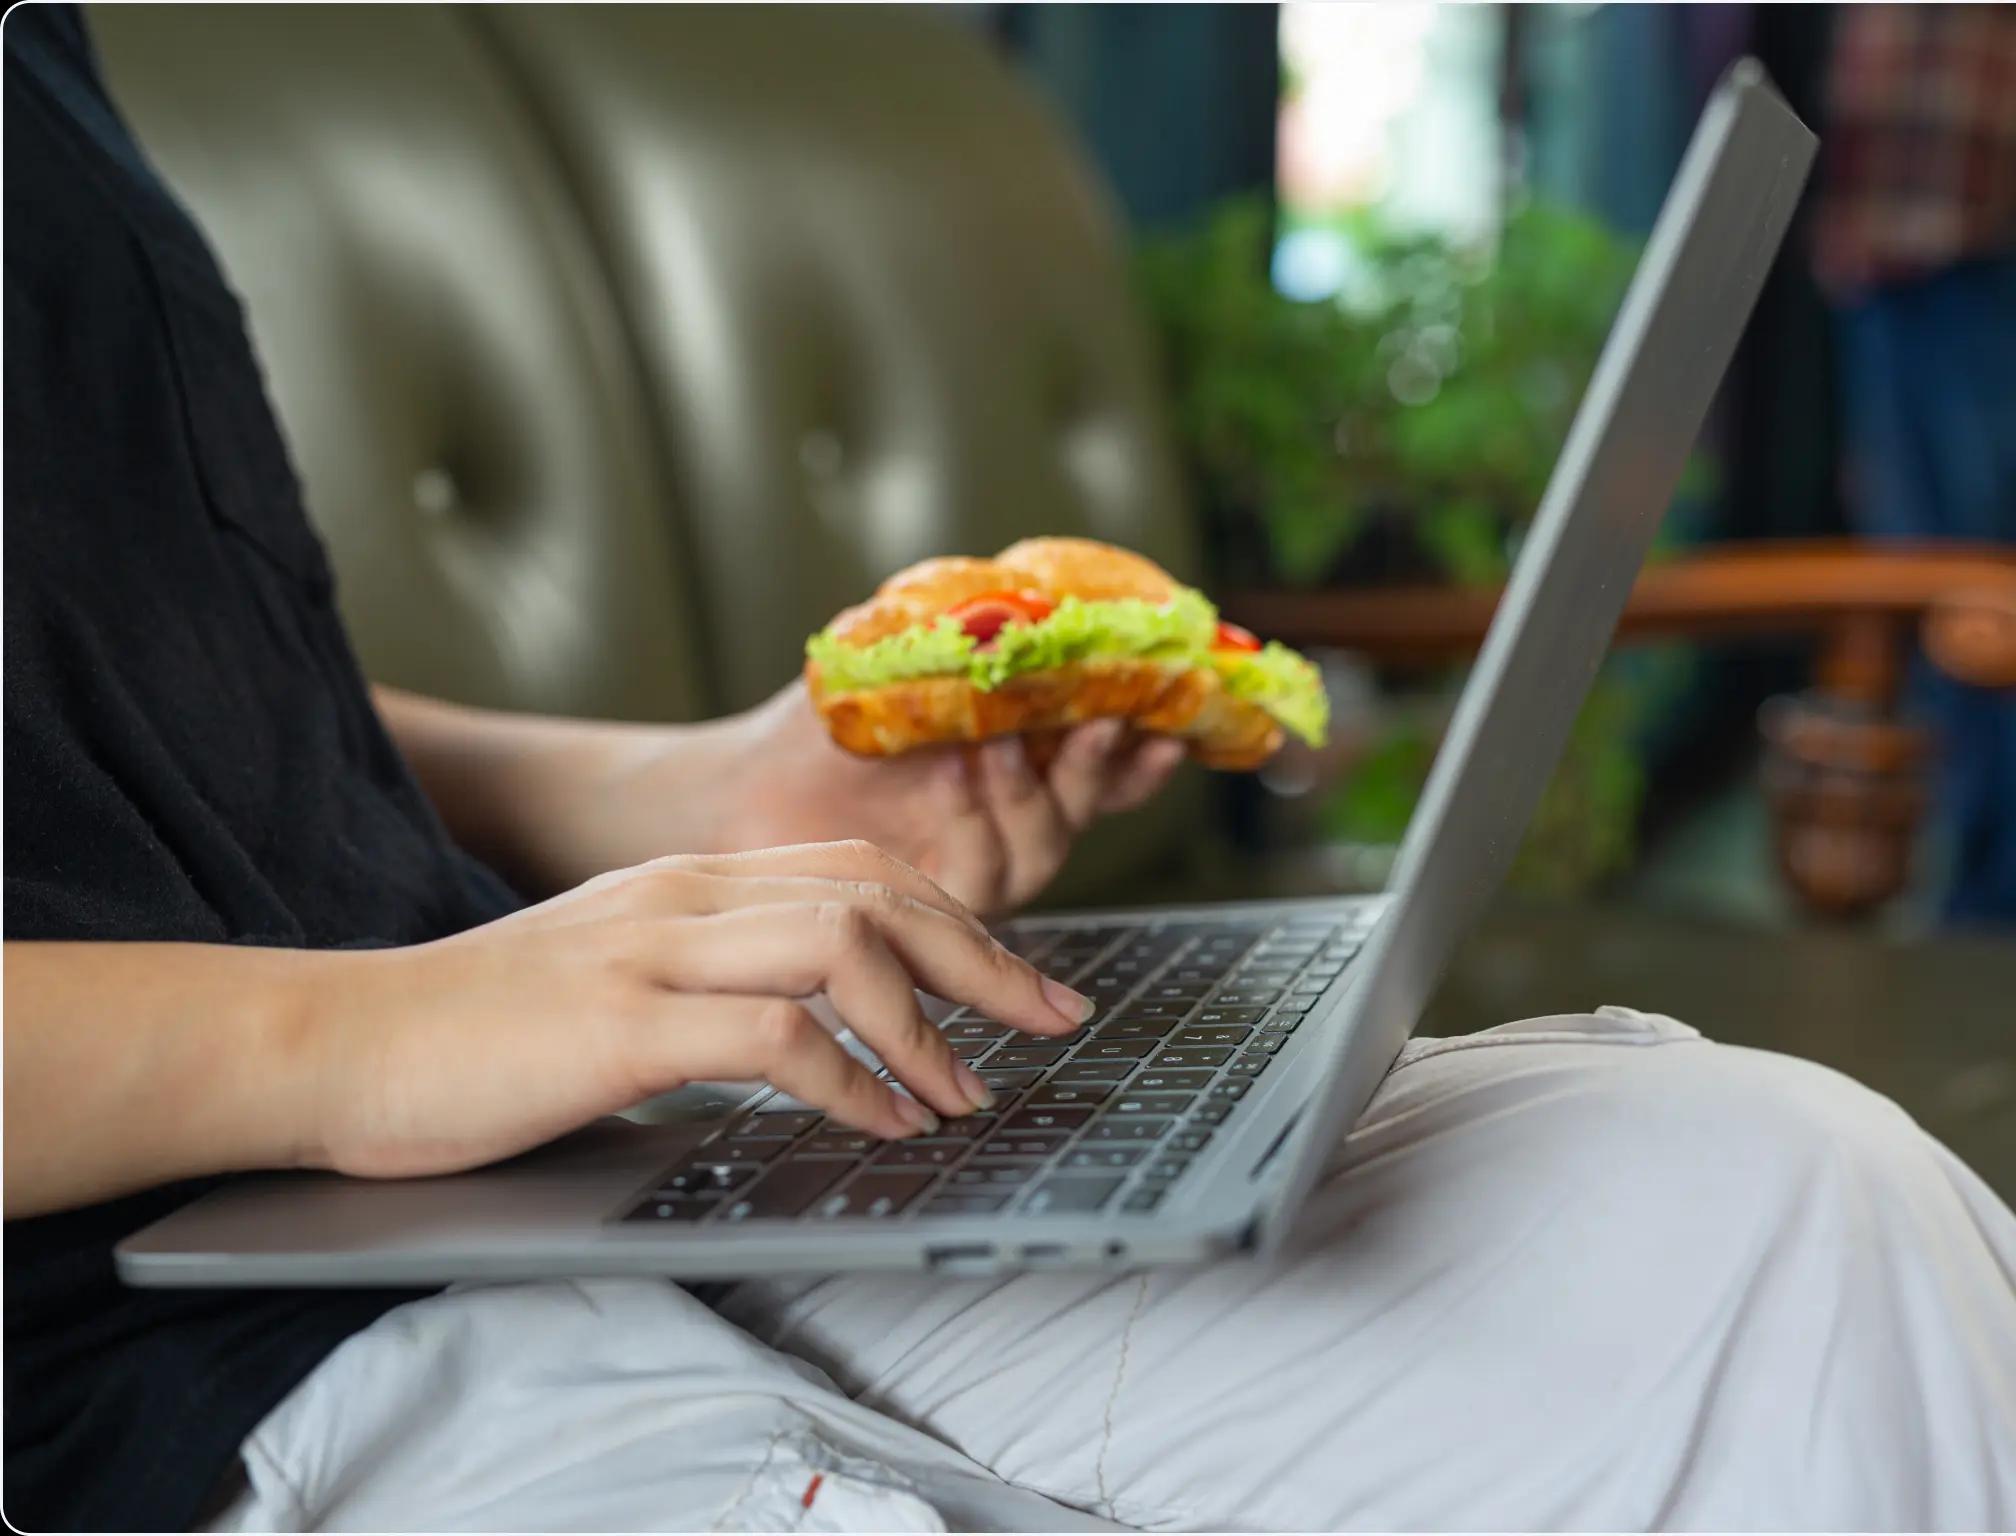 a man eating food and using a computer